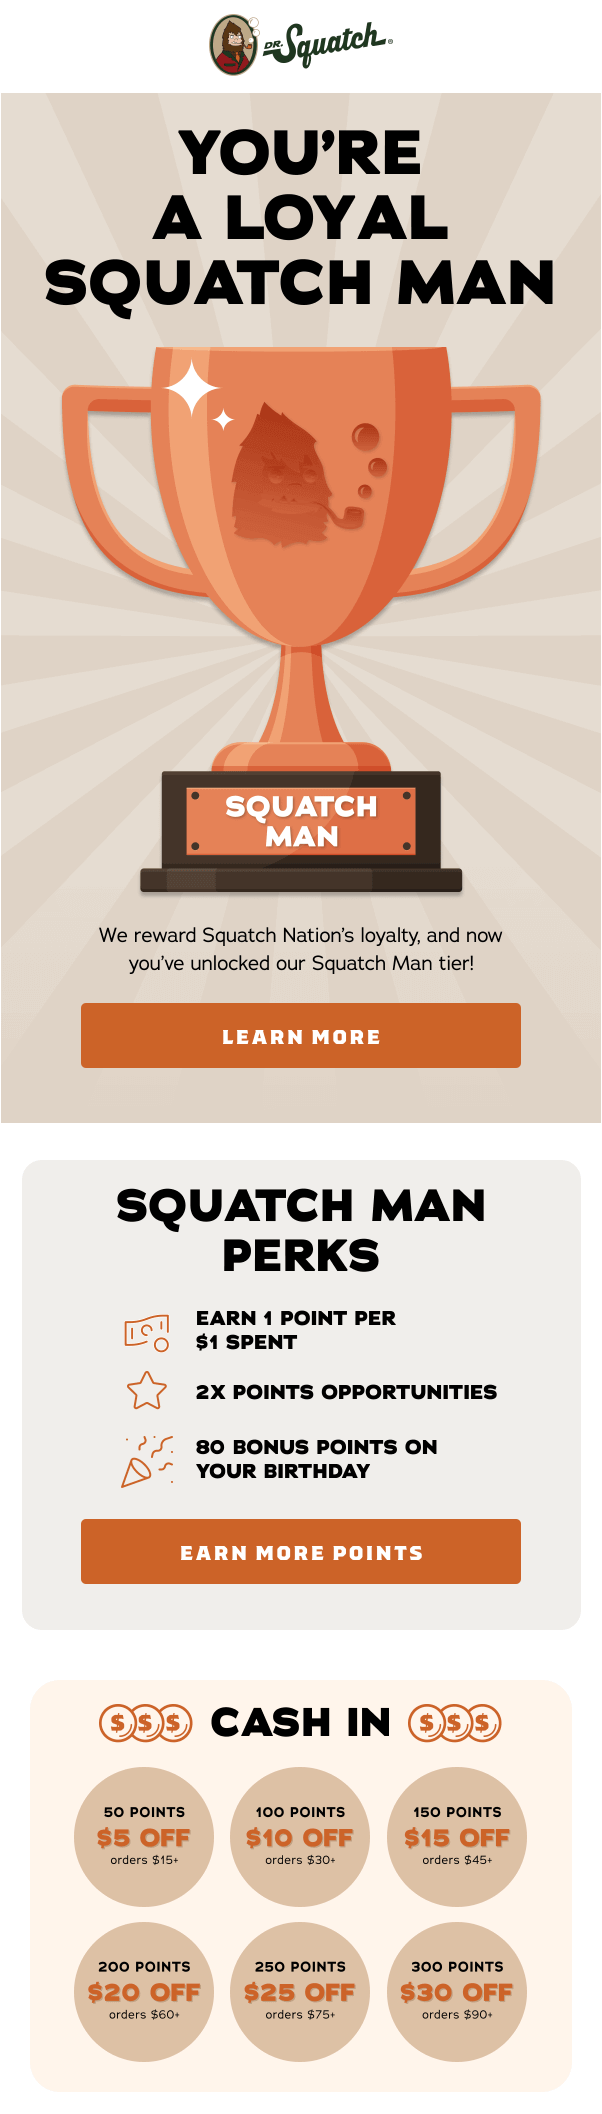 Squatch_loyalty_program_email_example 